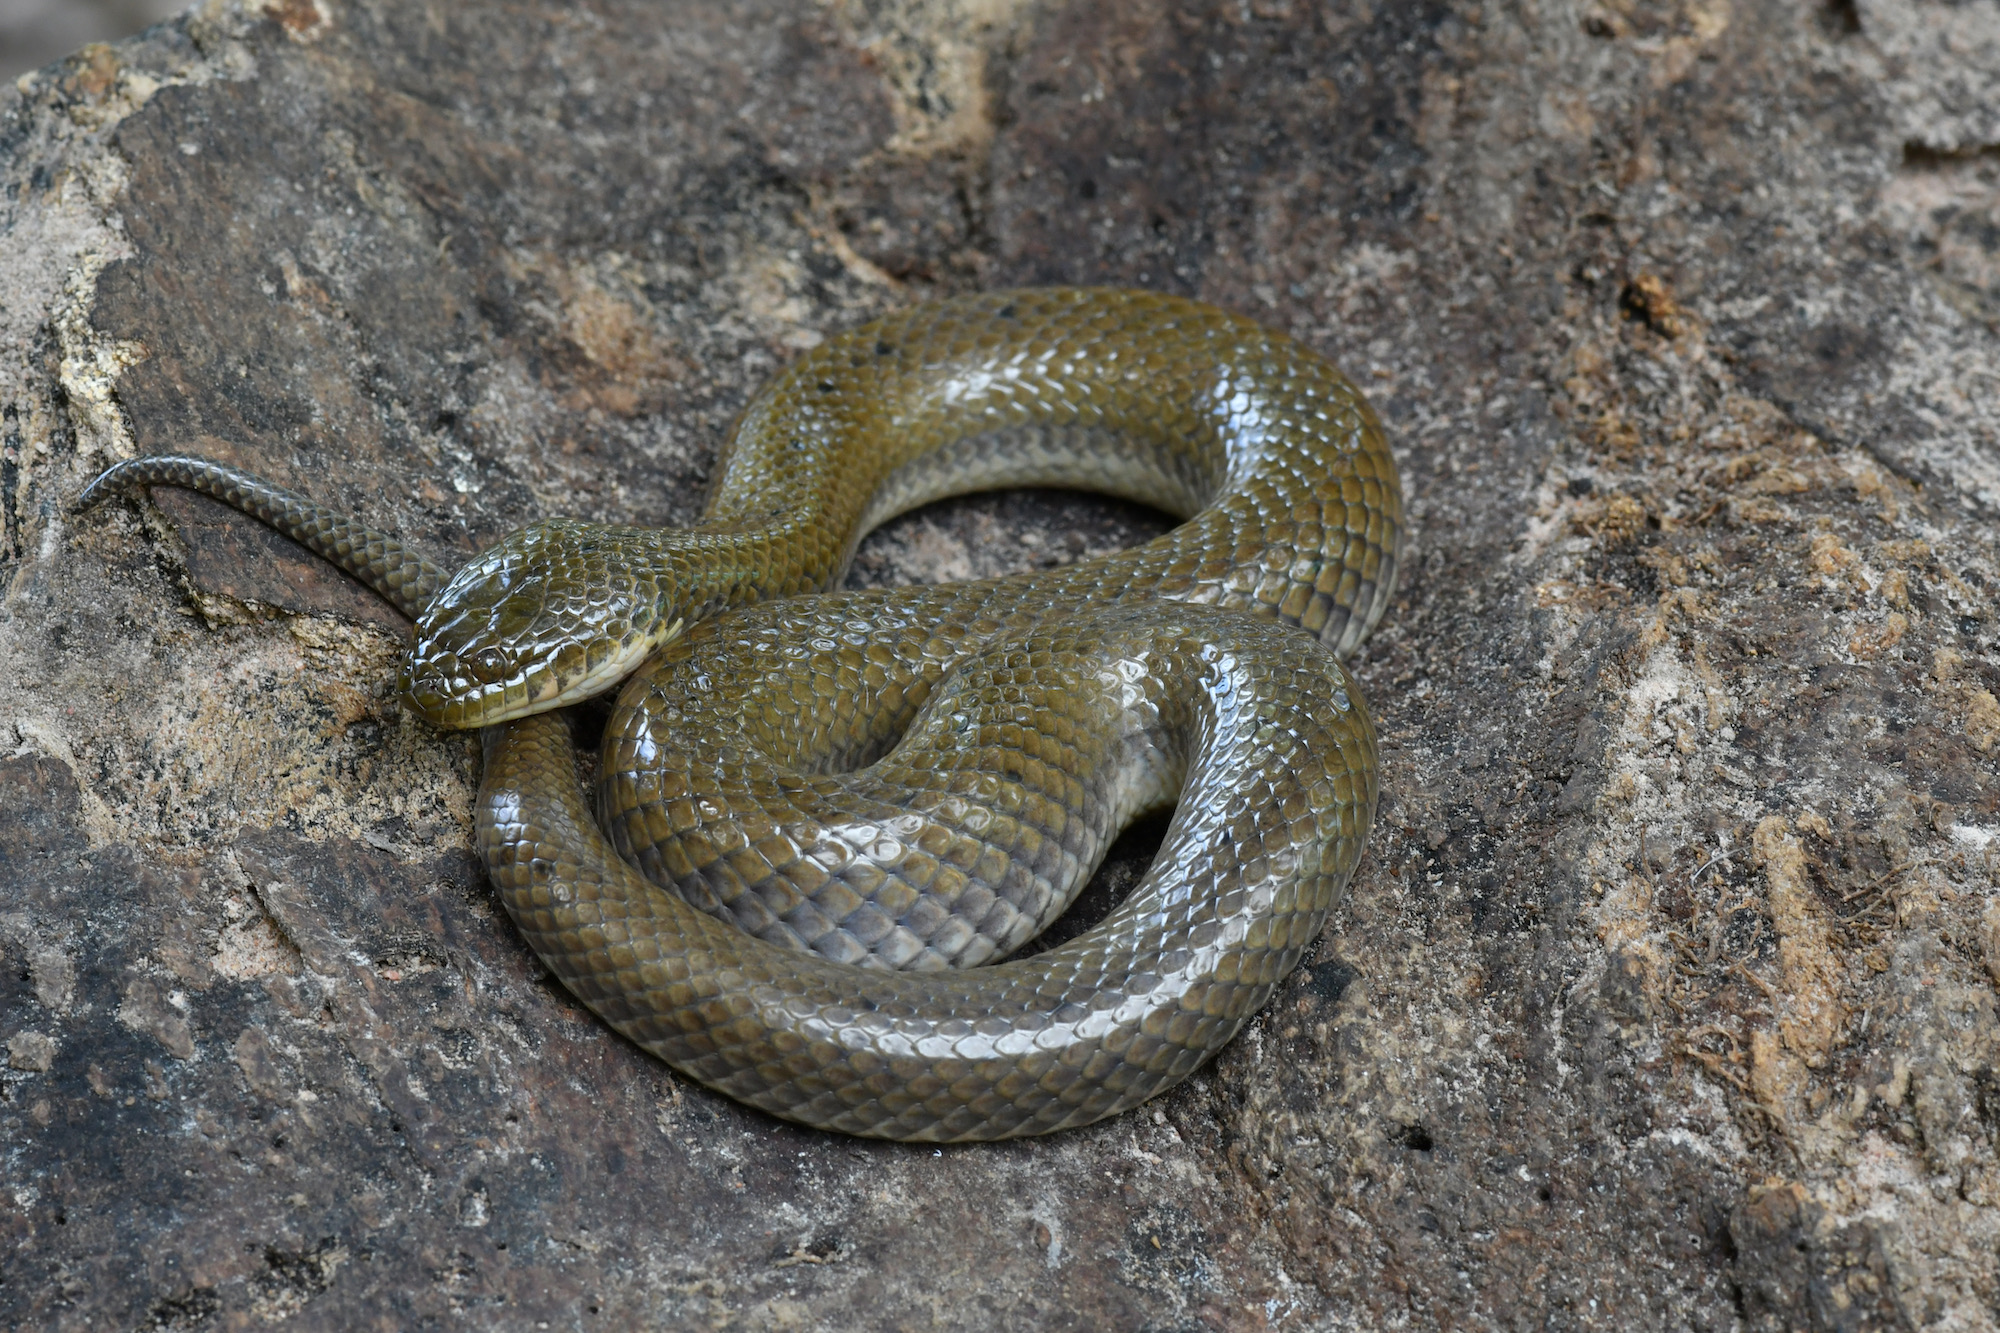 Coiled aquatic snake known as Hypsiscopus plumbeus.